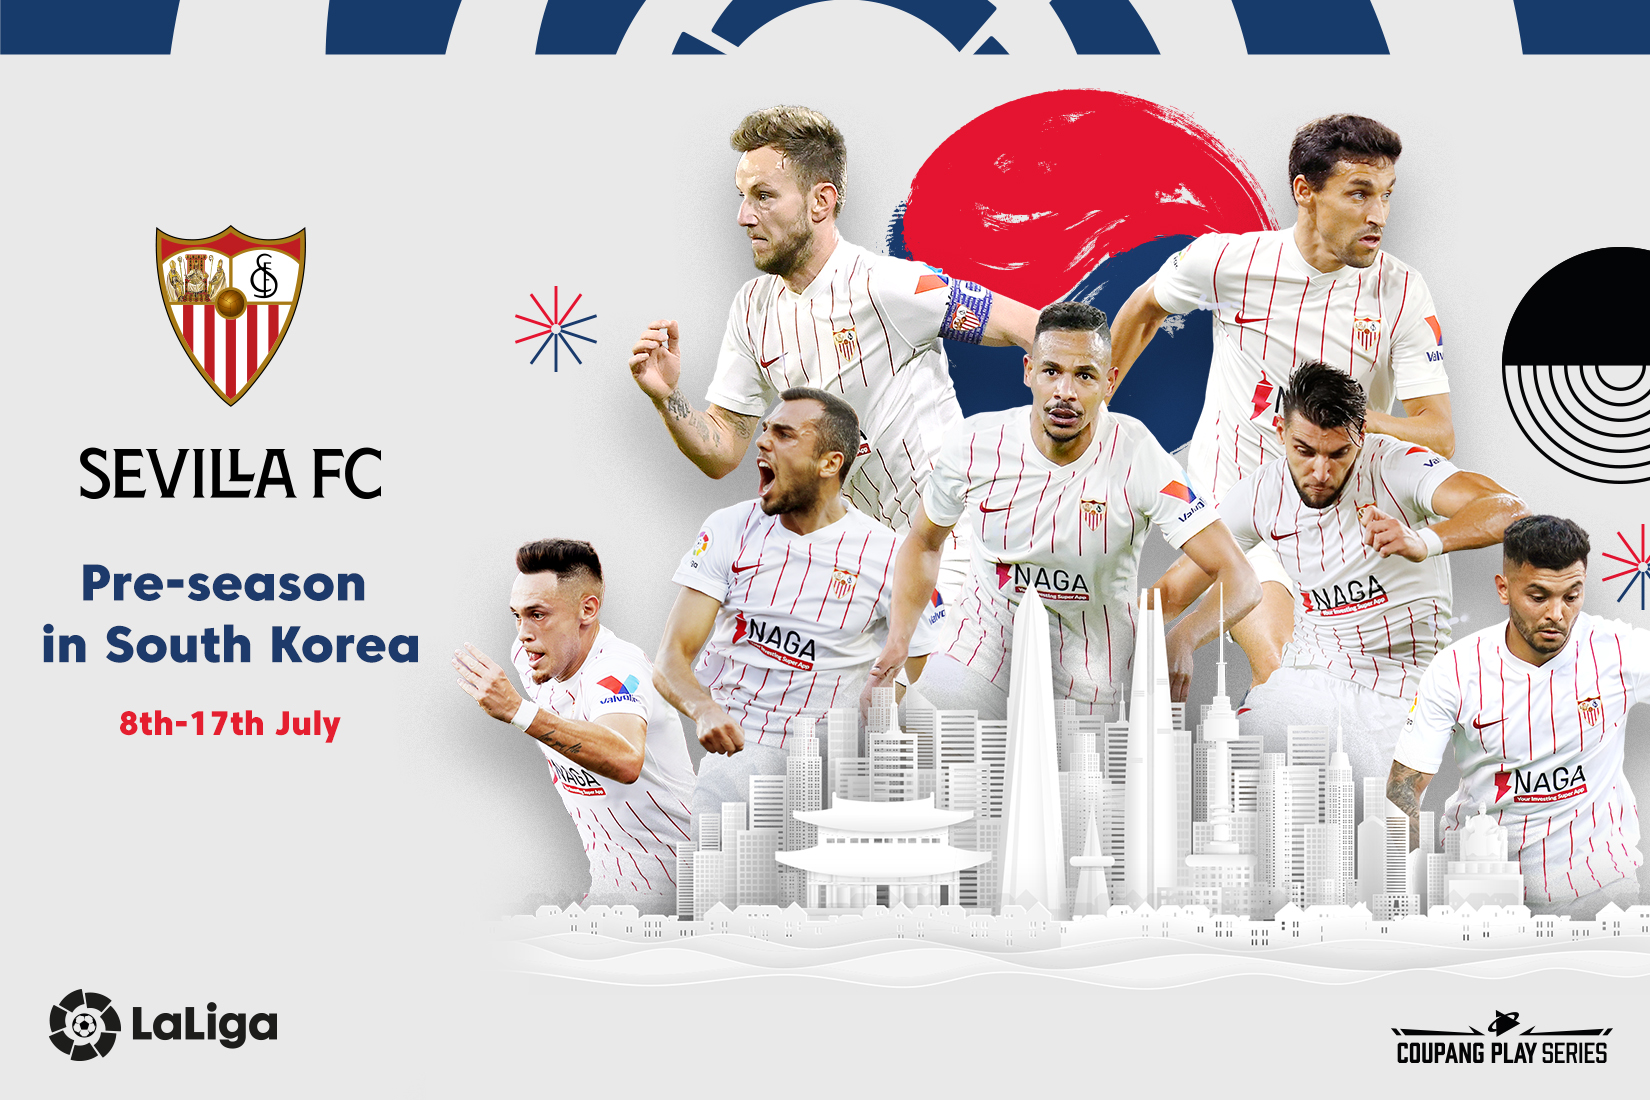 Pre-season tour in South Korea from 8-17 July